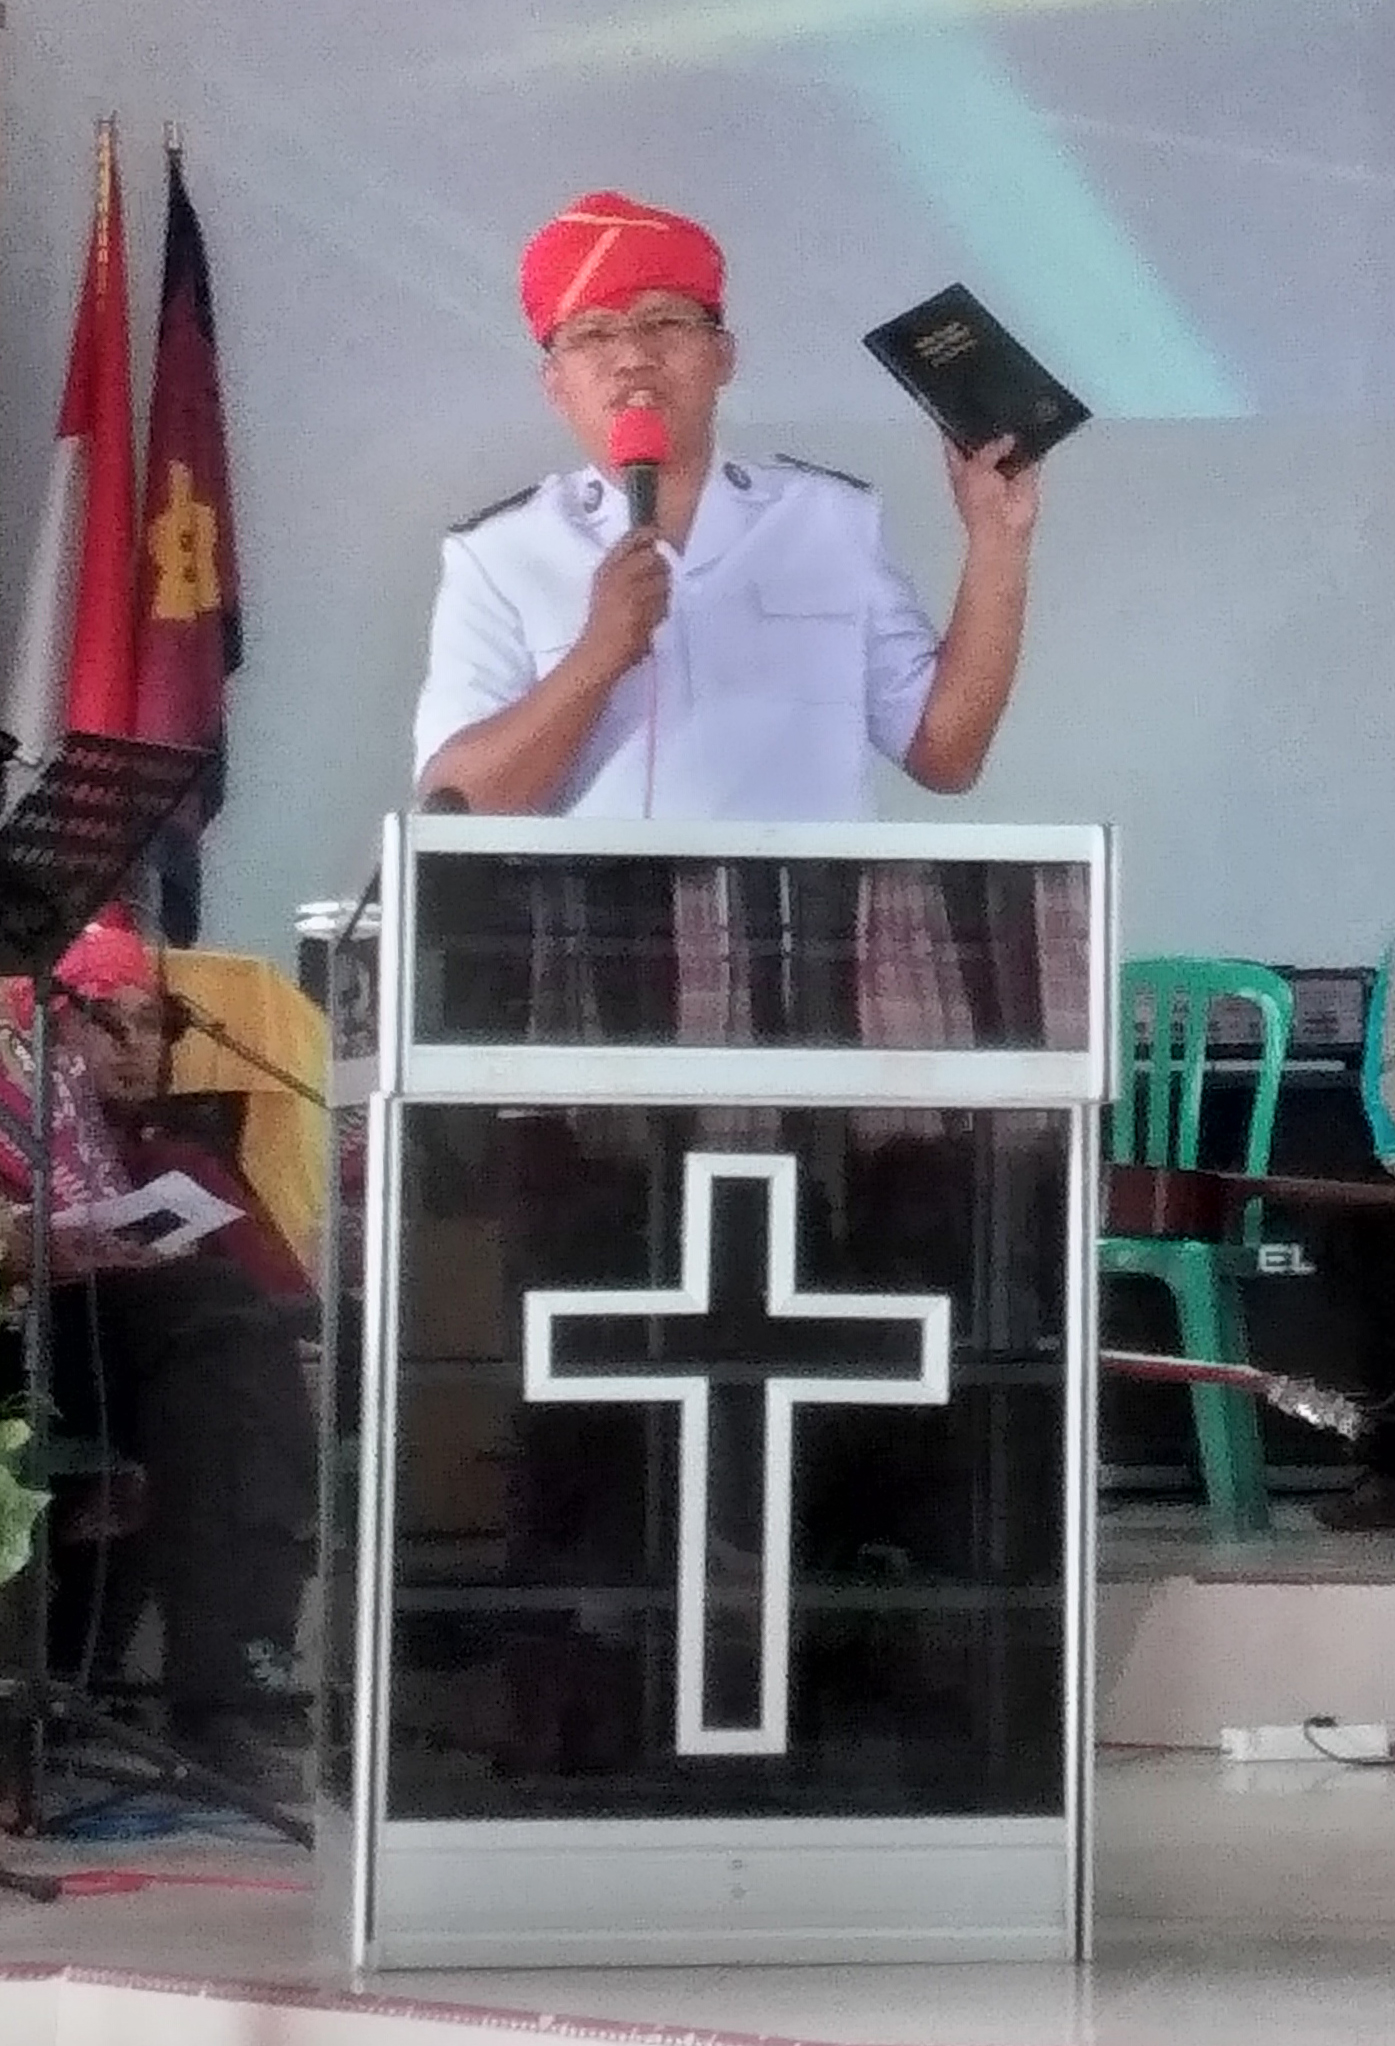 Image of the Tado New Testament being held up at the launch event in Lindu, Indonesia